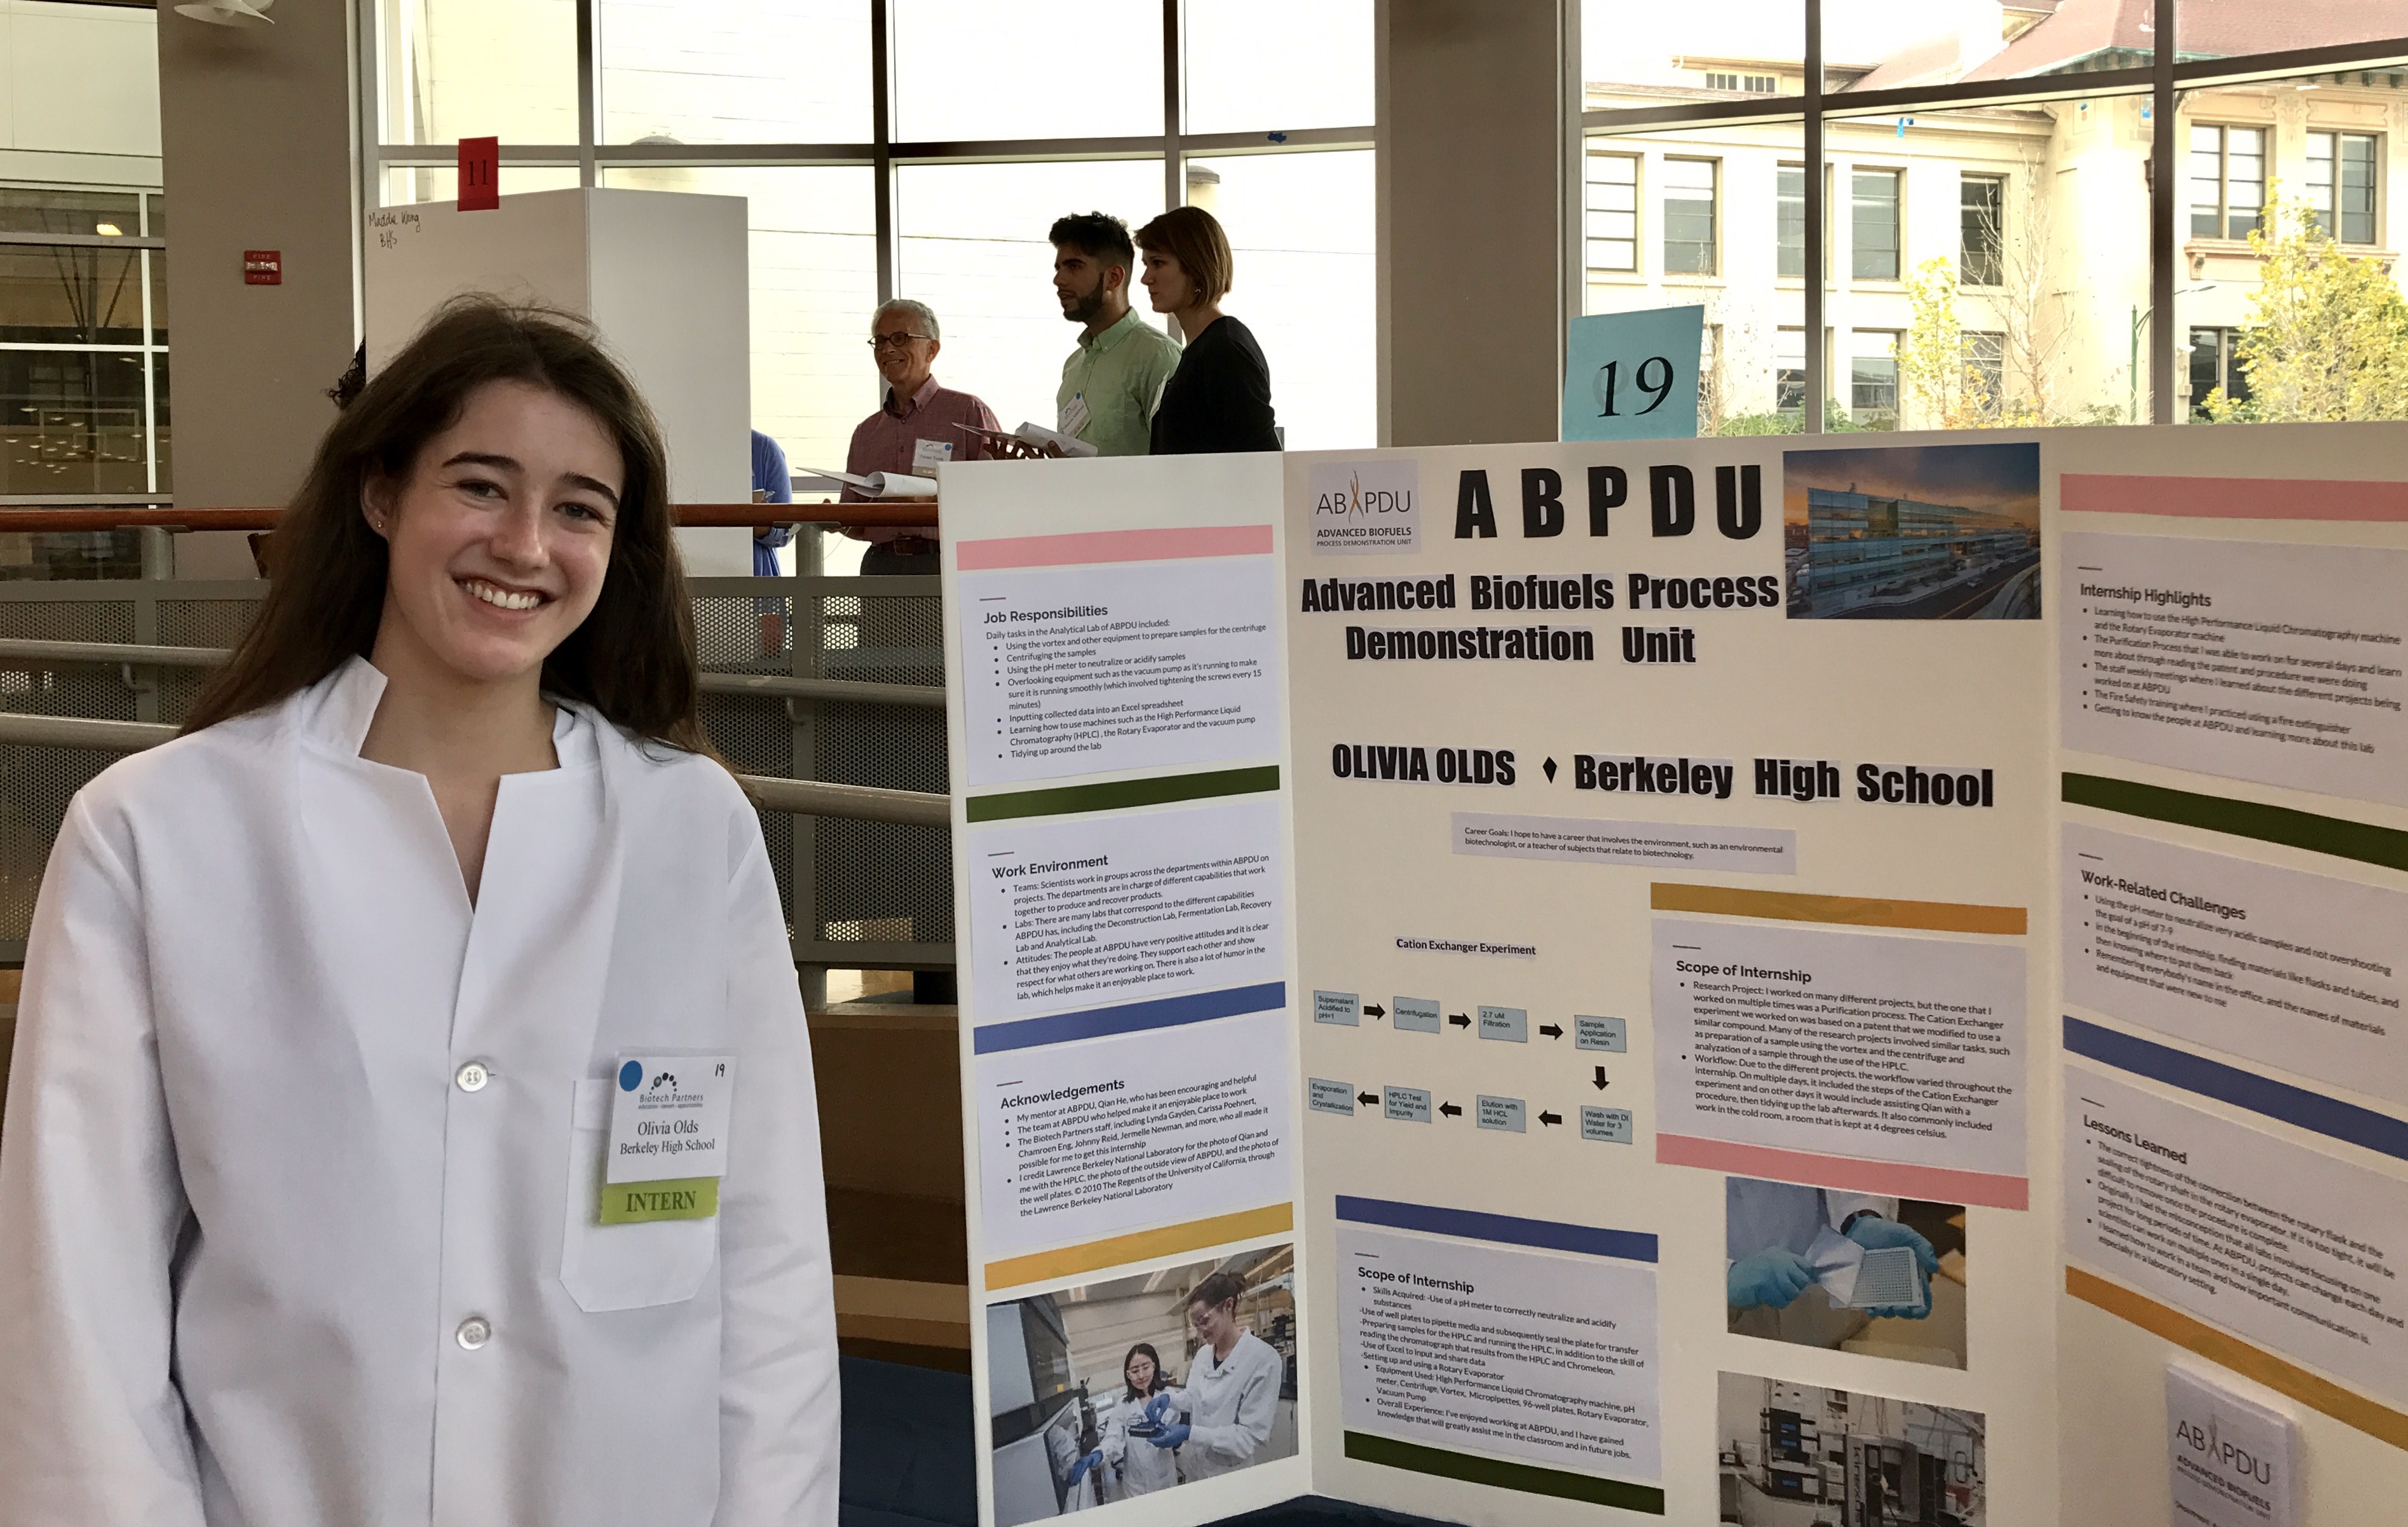 ABPDU's Olivia Olds received an honorable mention for “Best Oral Presentation”